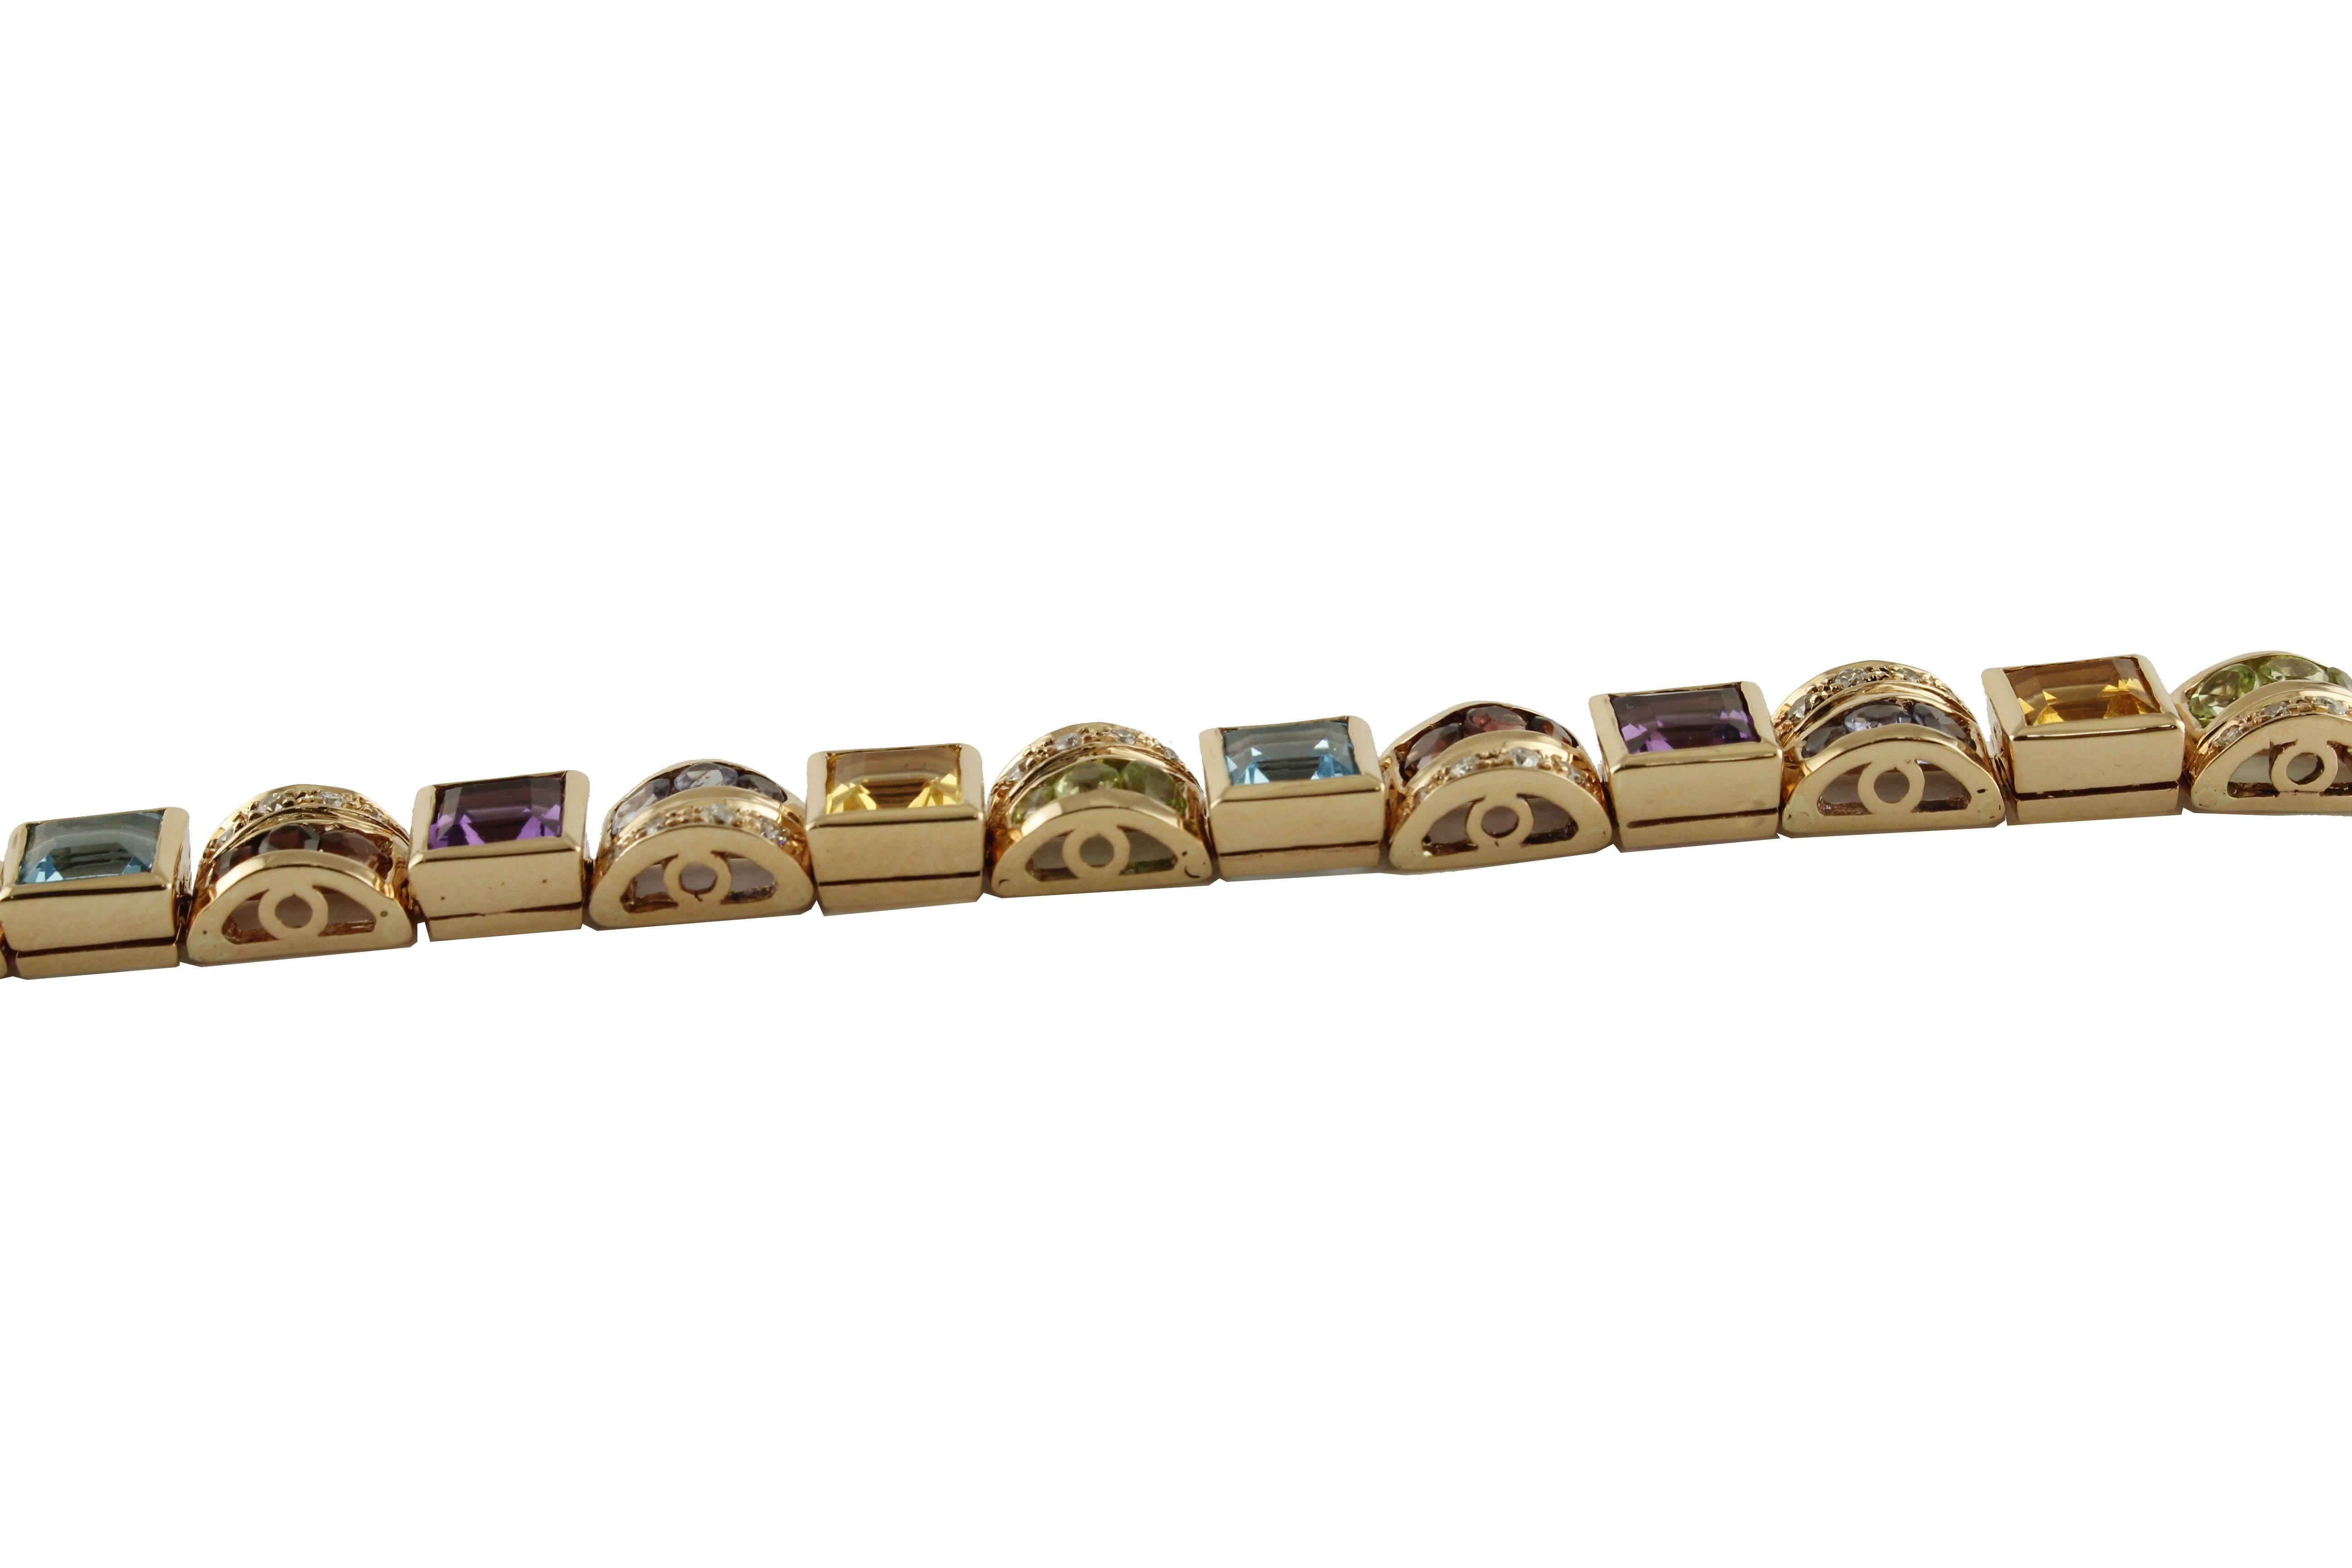  Topazs, Peridots, Garnets, Iolite, Amethysts, Diamonds, Gold Bracelet In Good Condition For Sale In Marcianise, Marcianise (CE)